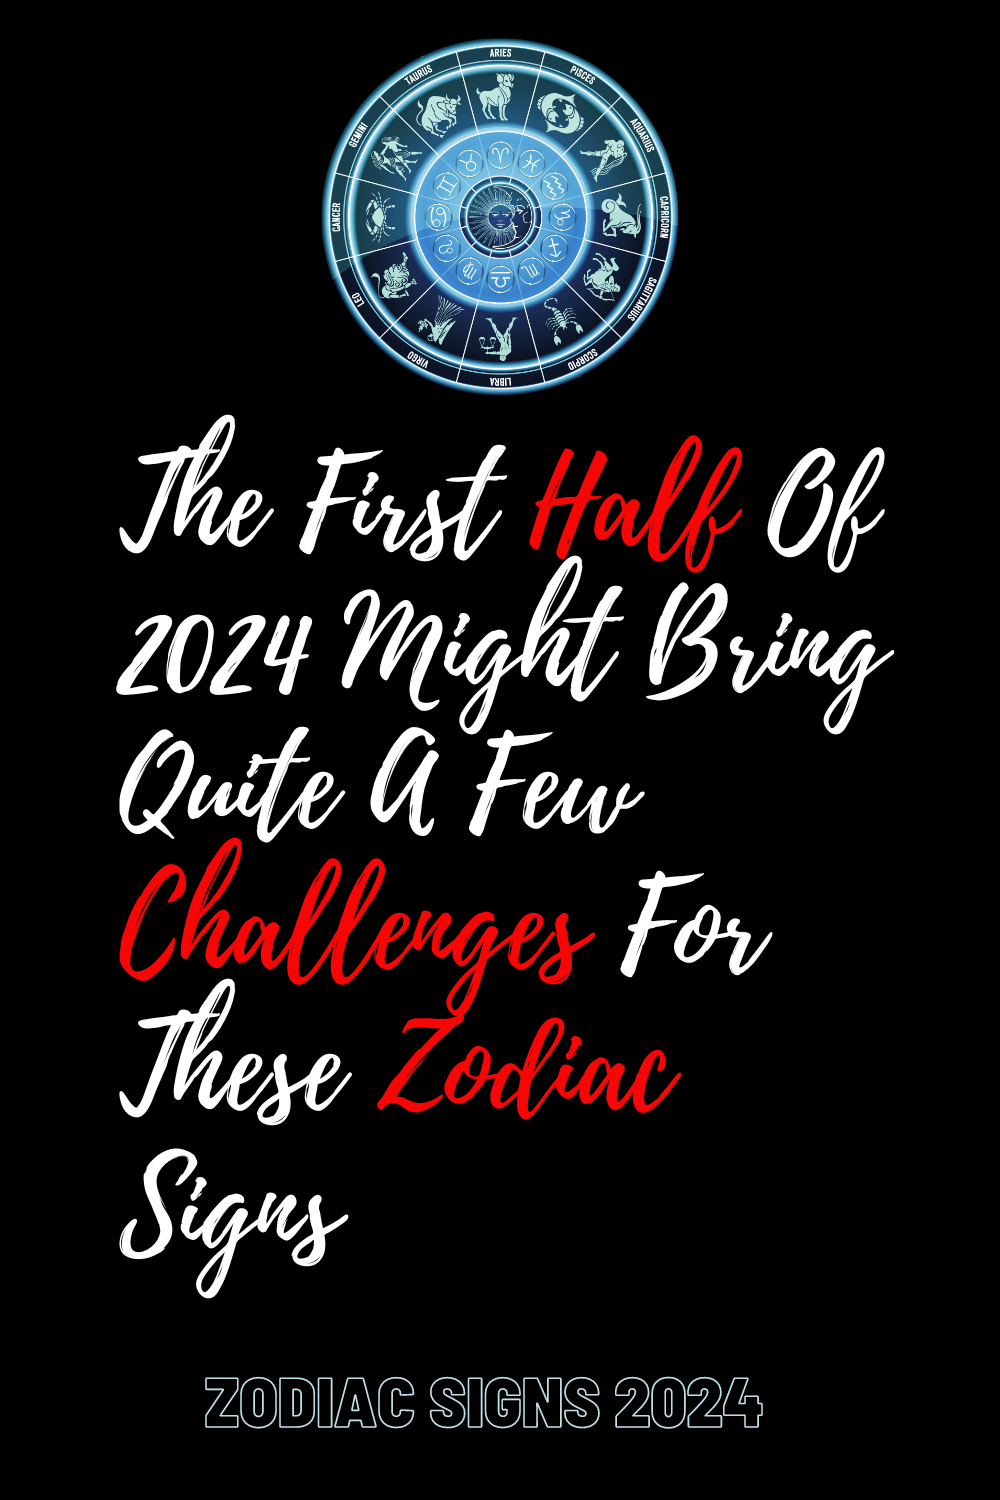 The First Half Of 2024 Might Bring Quite A Few Challenges For These Zodiac Signs